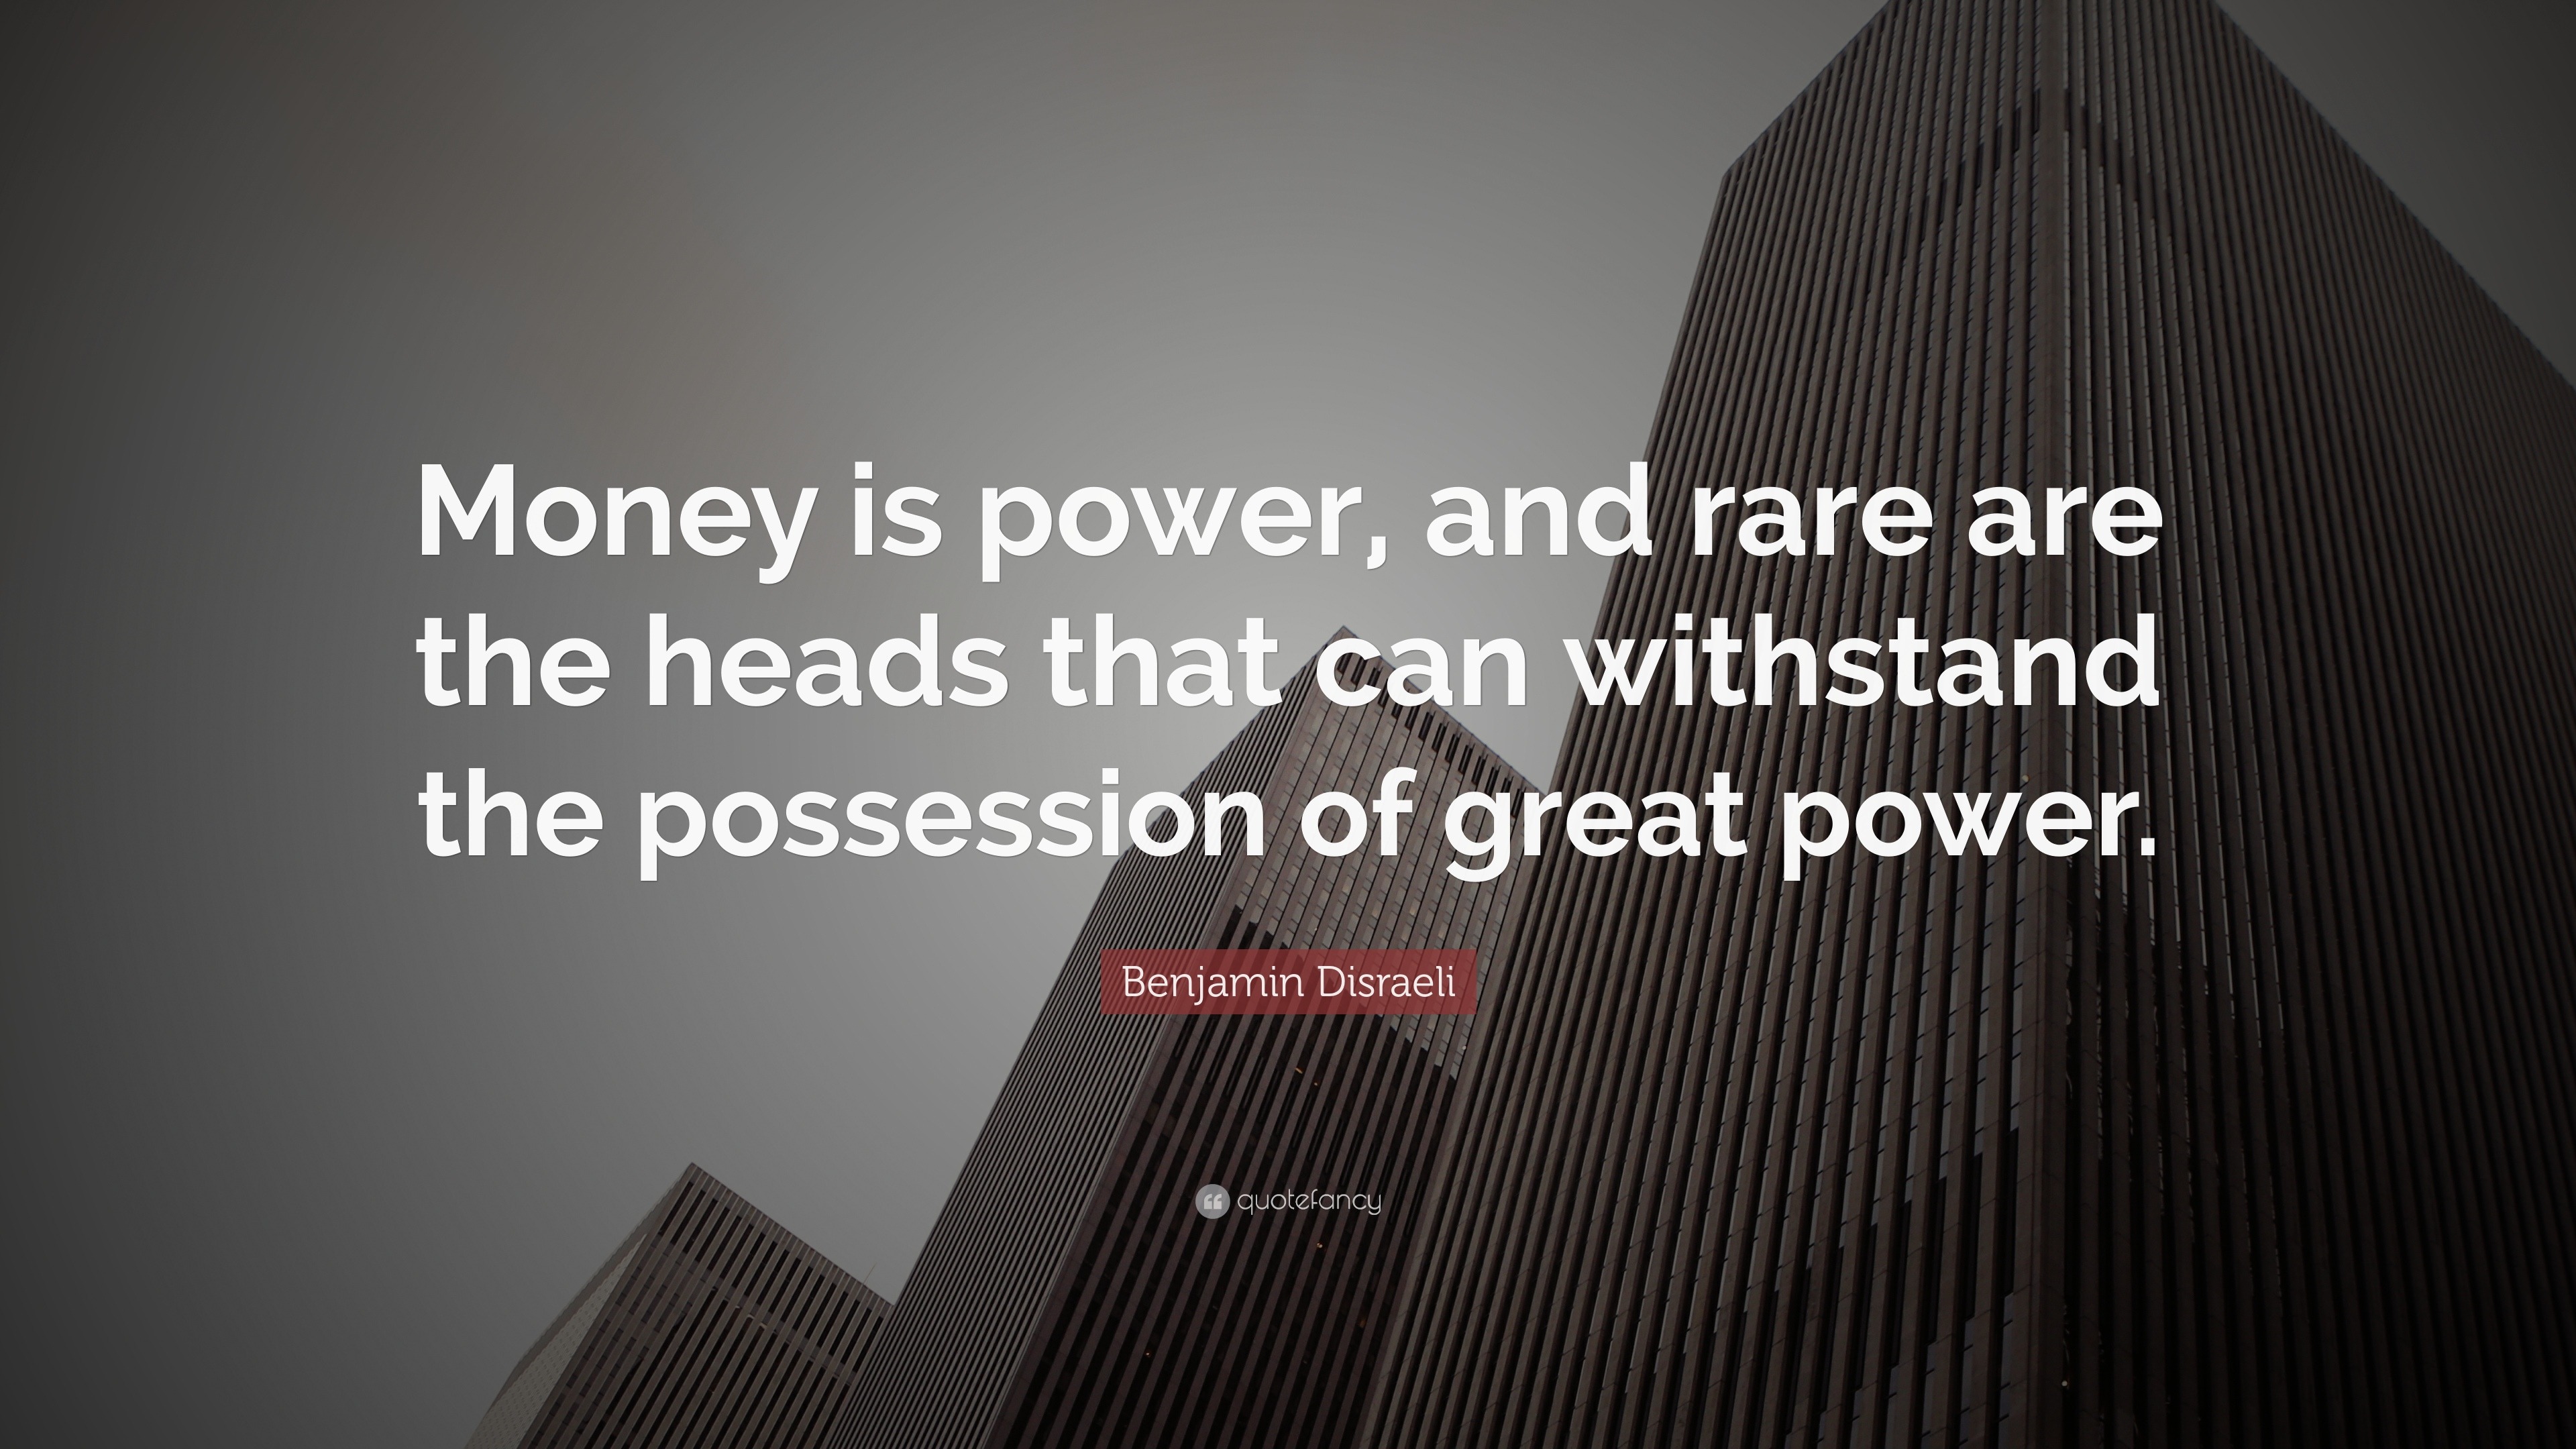 Benjamin Disraeli Quote “Money is power, and rare are the heads that